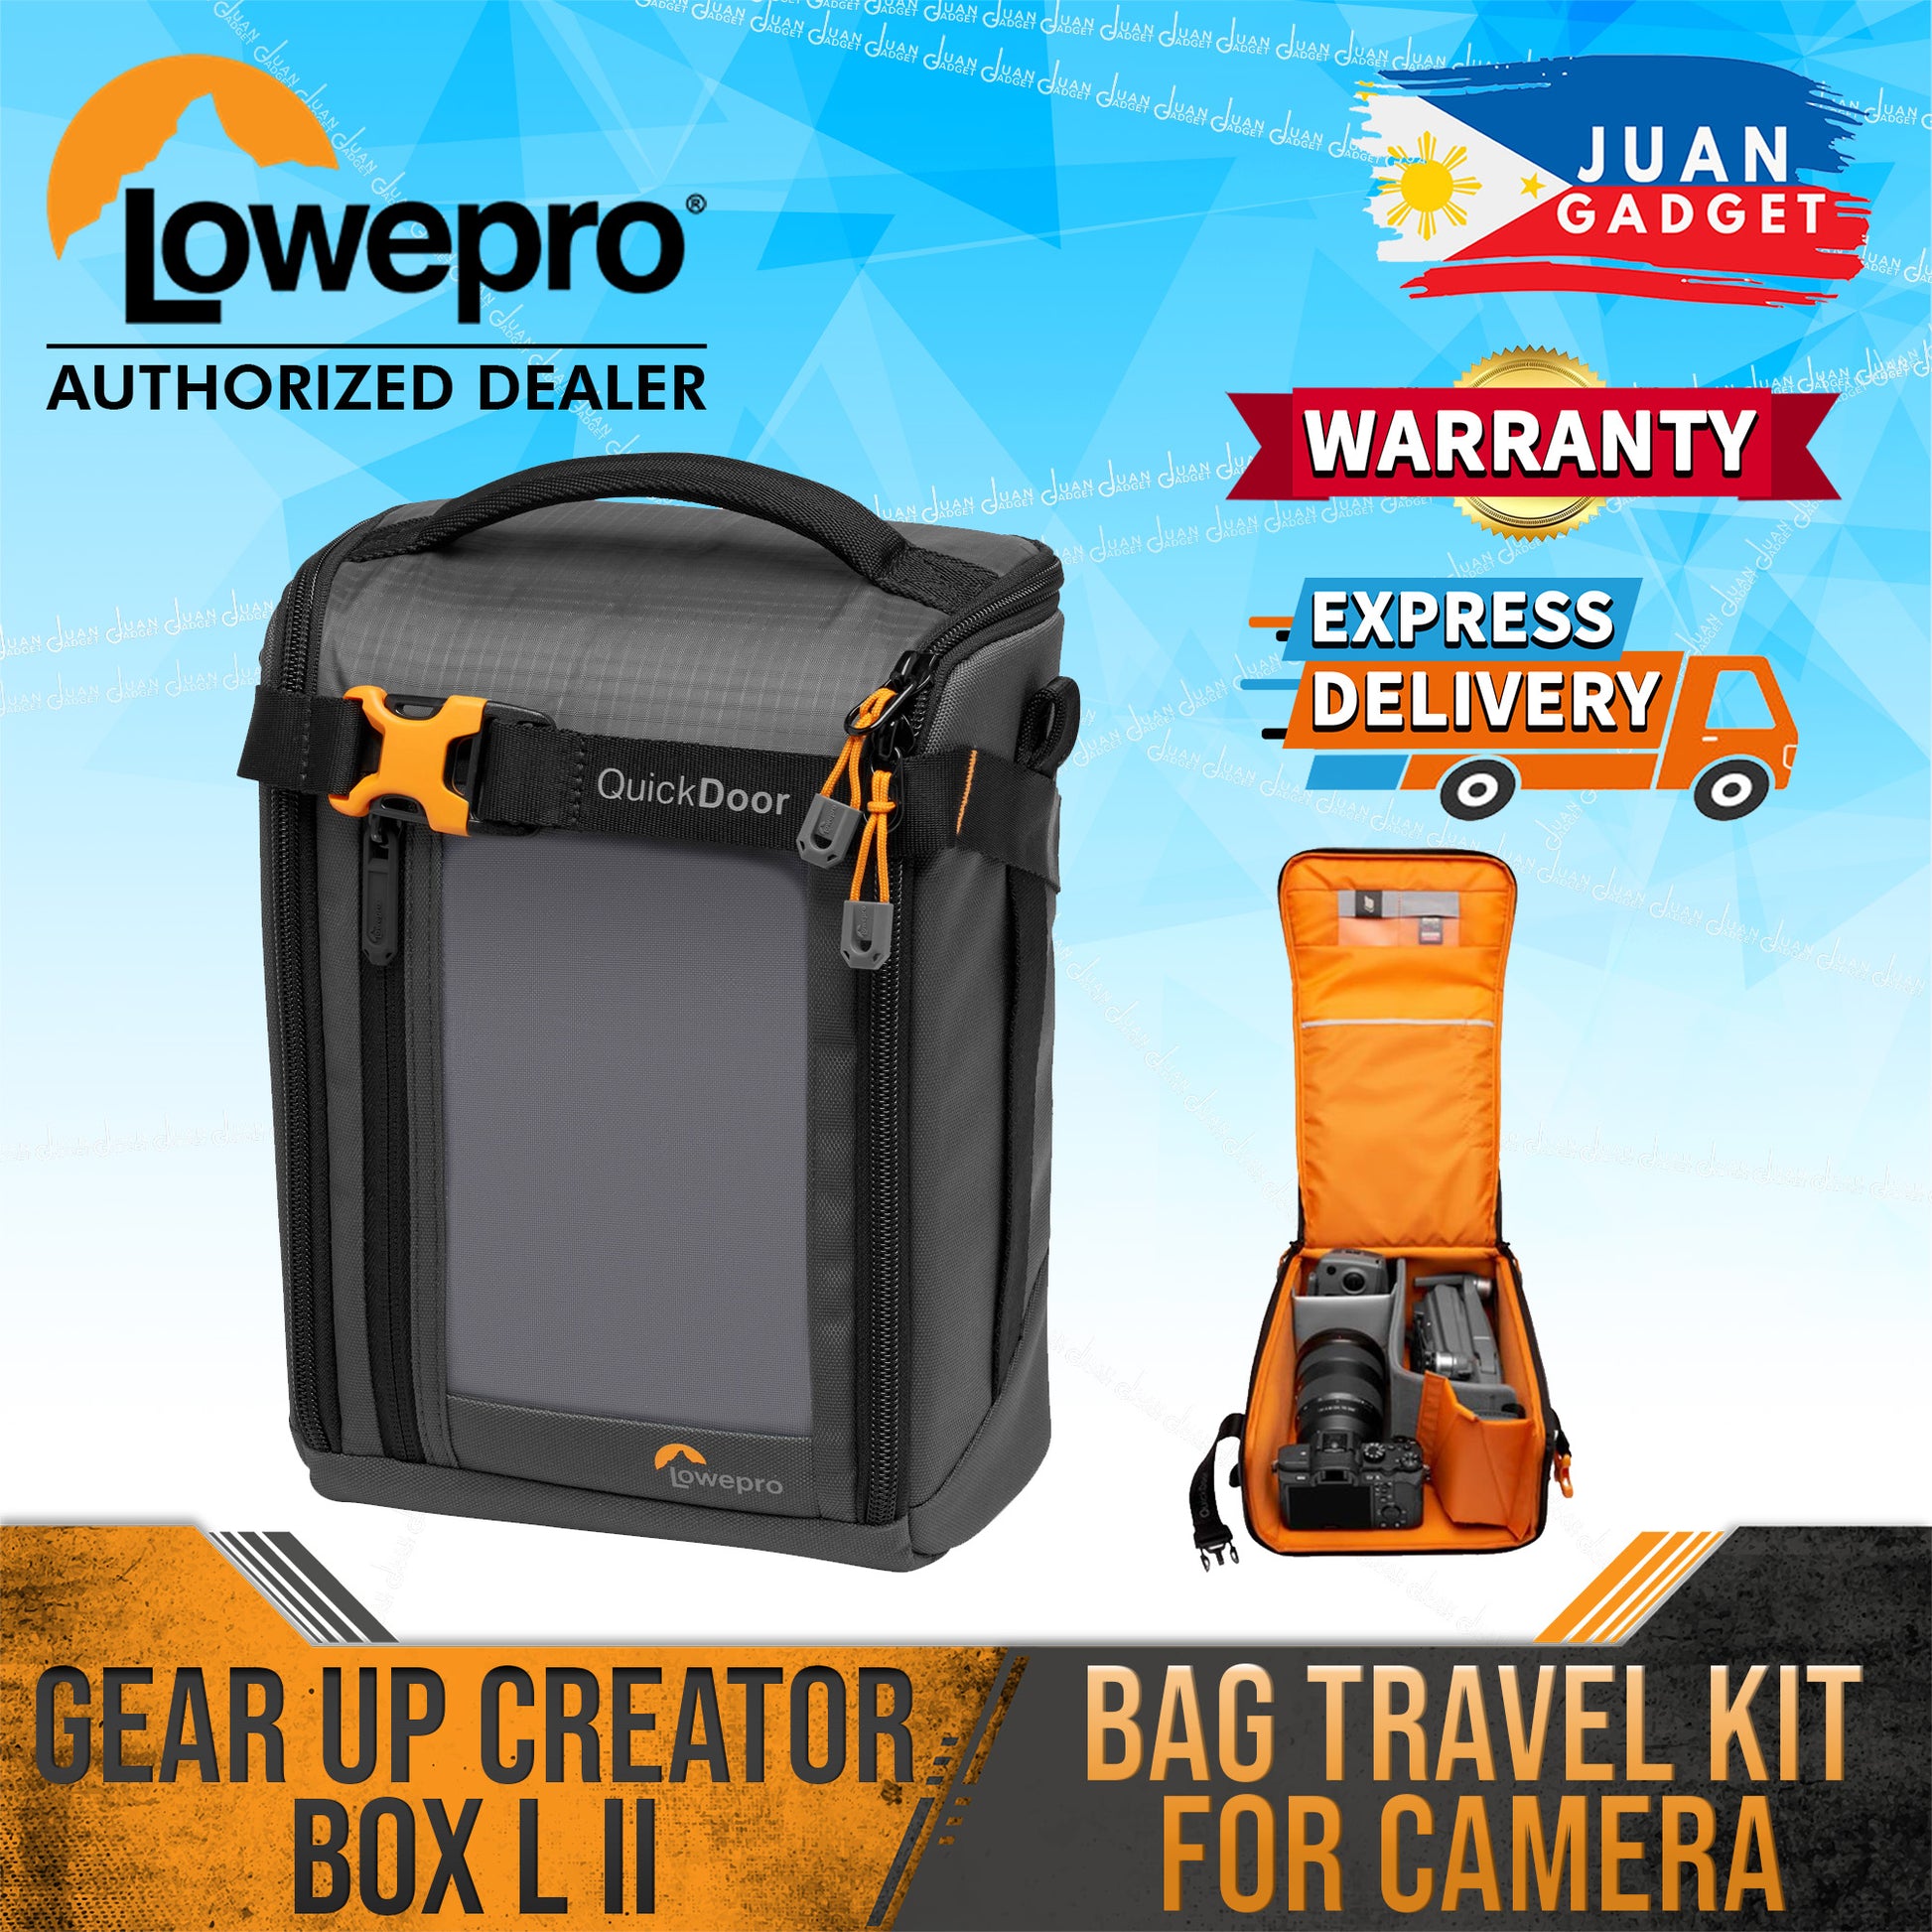 Lowepro GearUp Creator Box Large II Mirrorless and DSLR Camera Case with Quickdoor Access